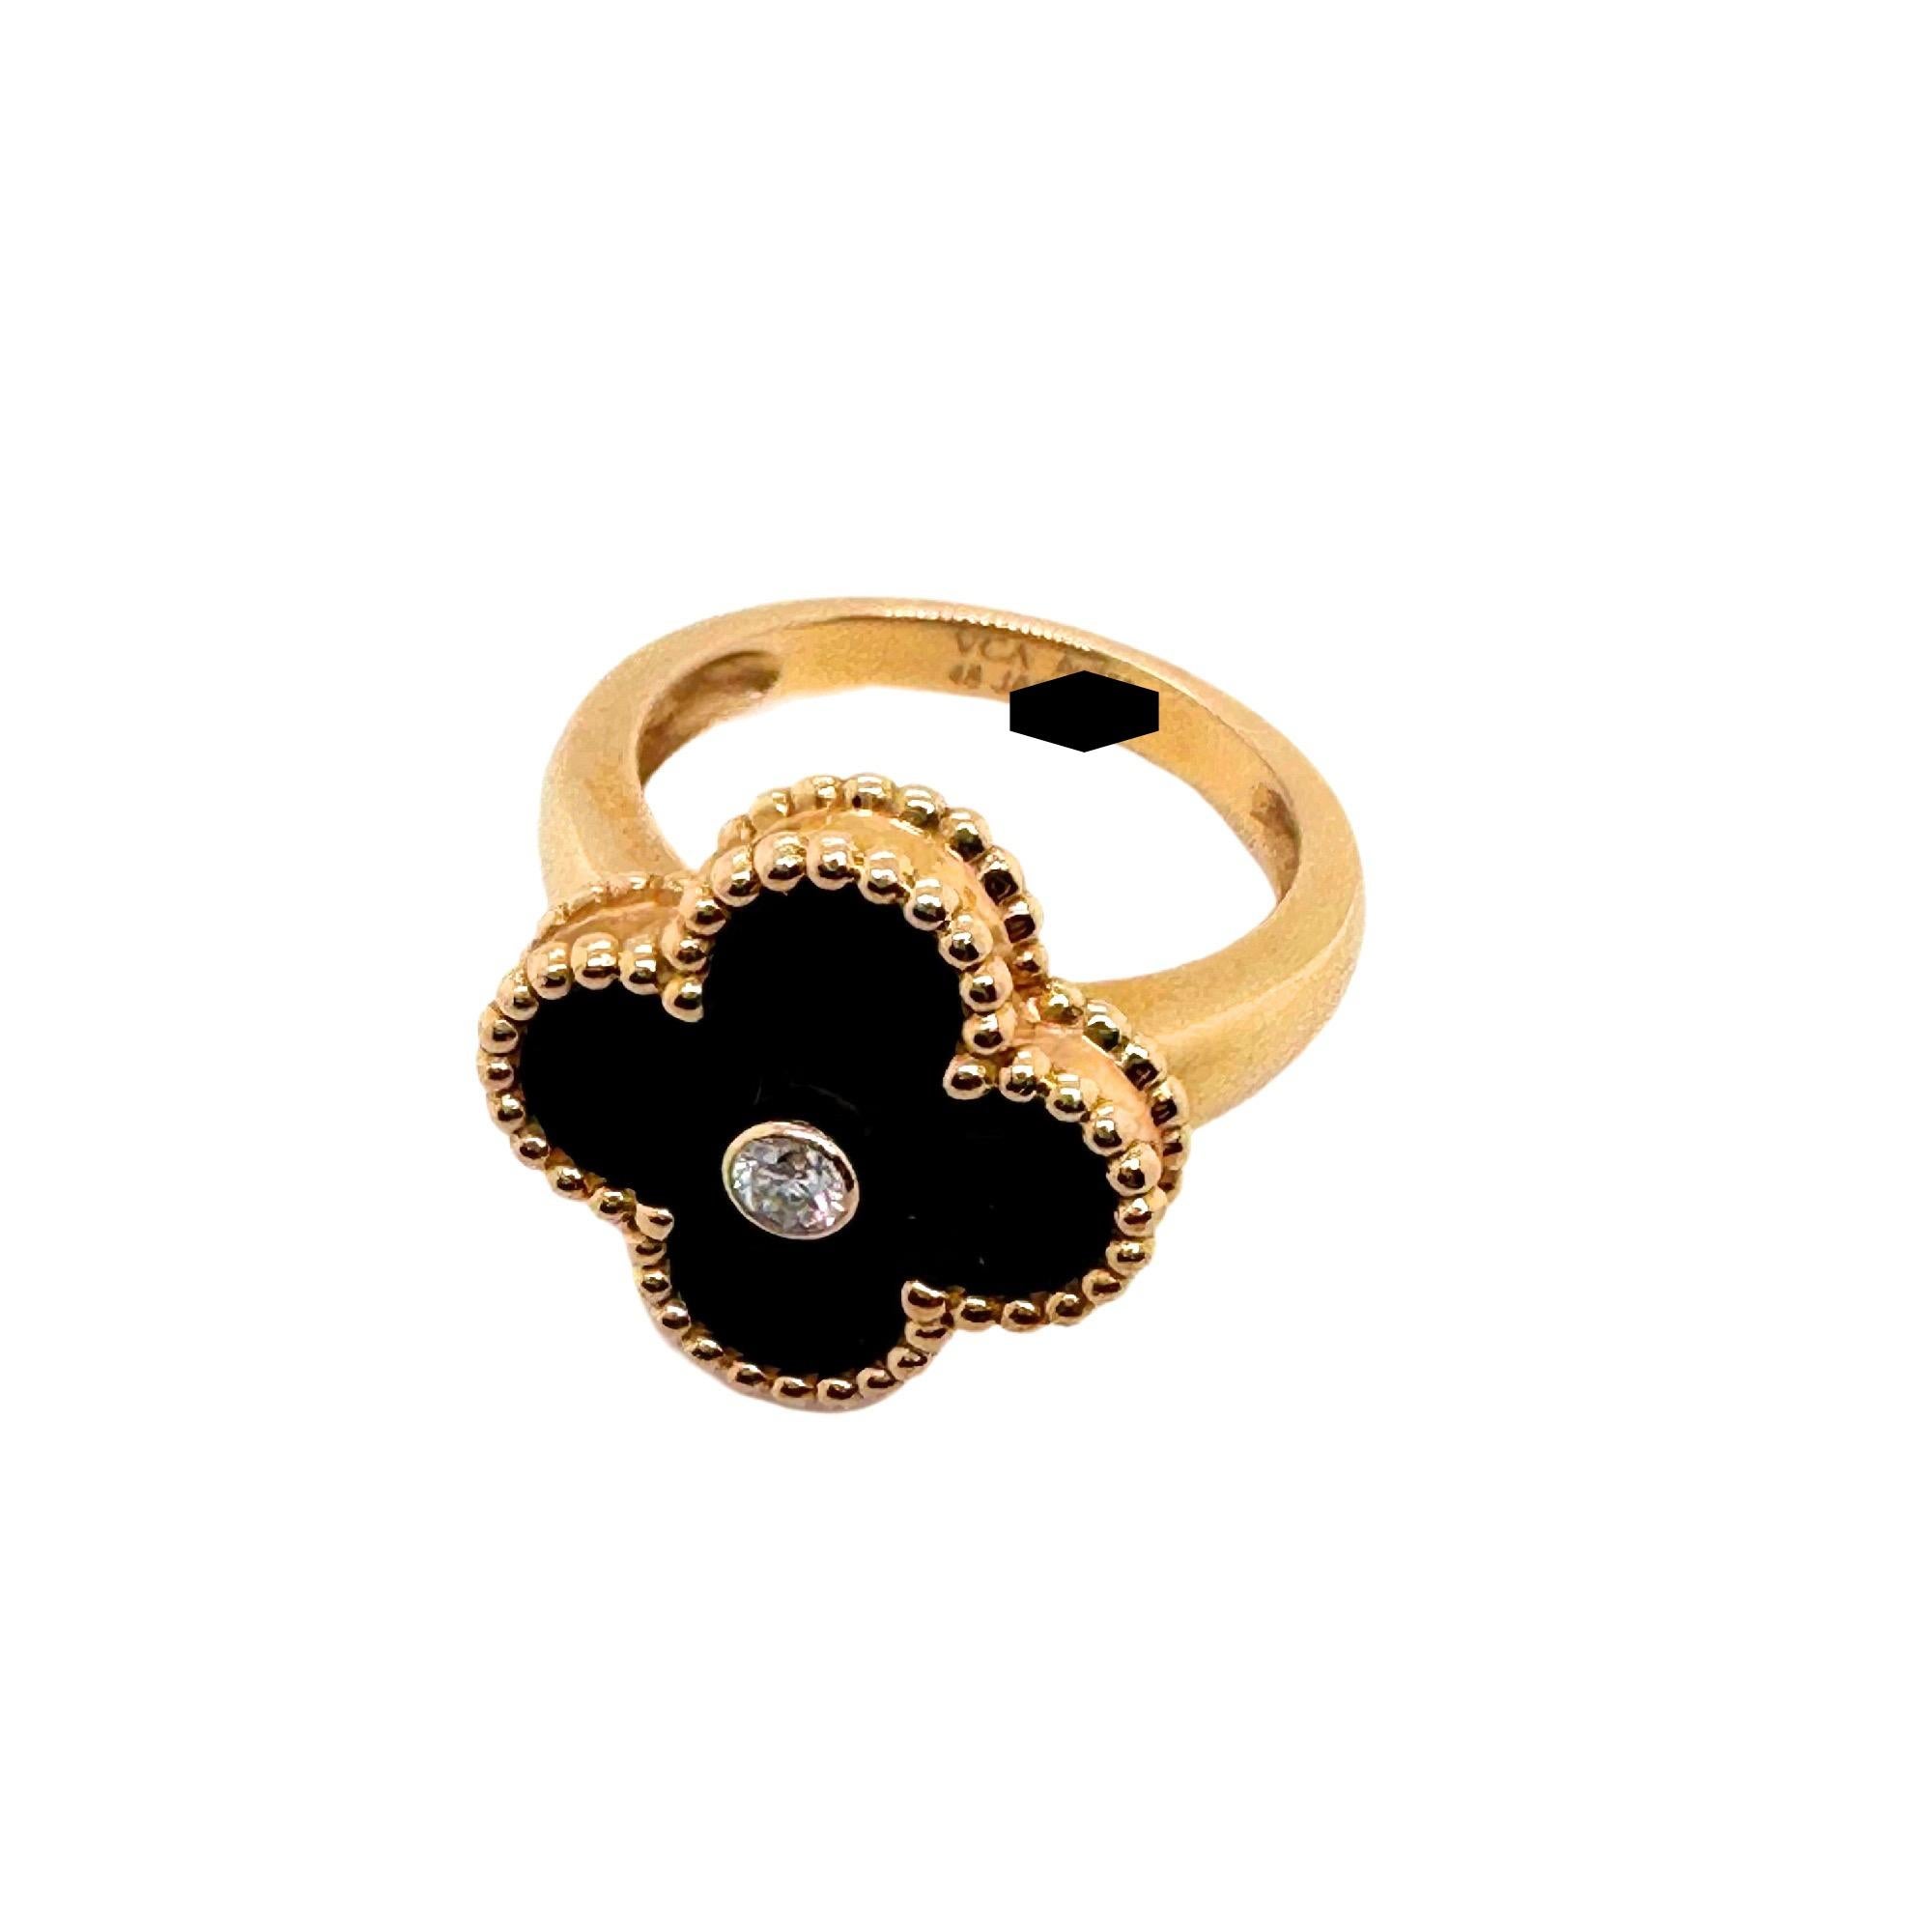 Van Cleef & Arpels Vintage Alhambra Black Onyx and Diamond Ring 18kt YG COA Box In Excellent Condition For Sale In San Diego, CA